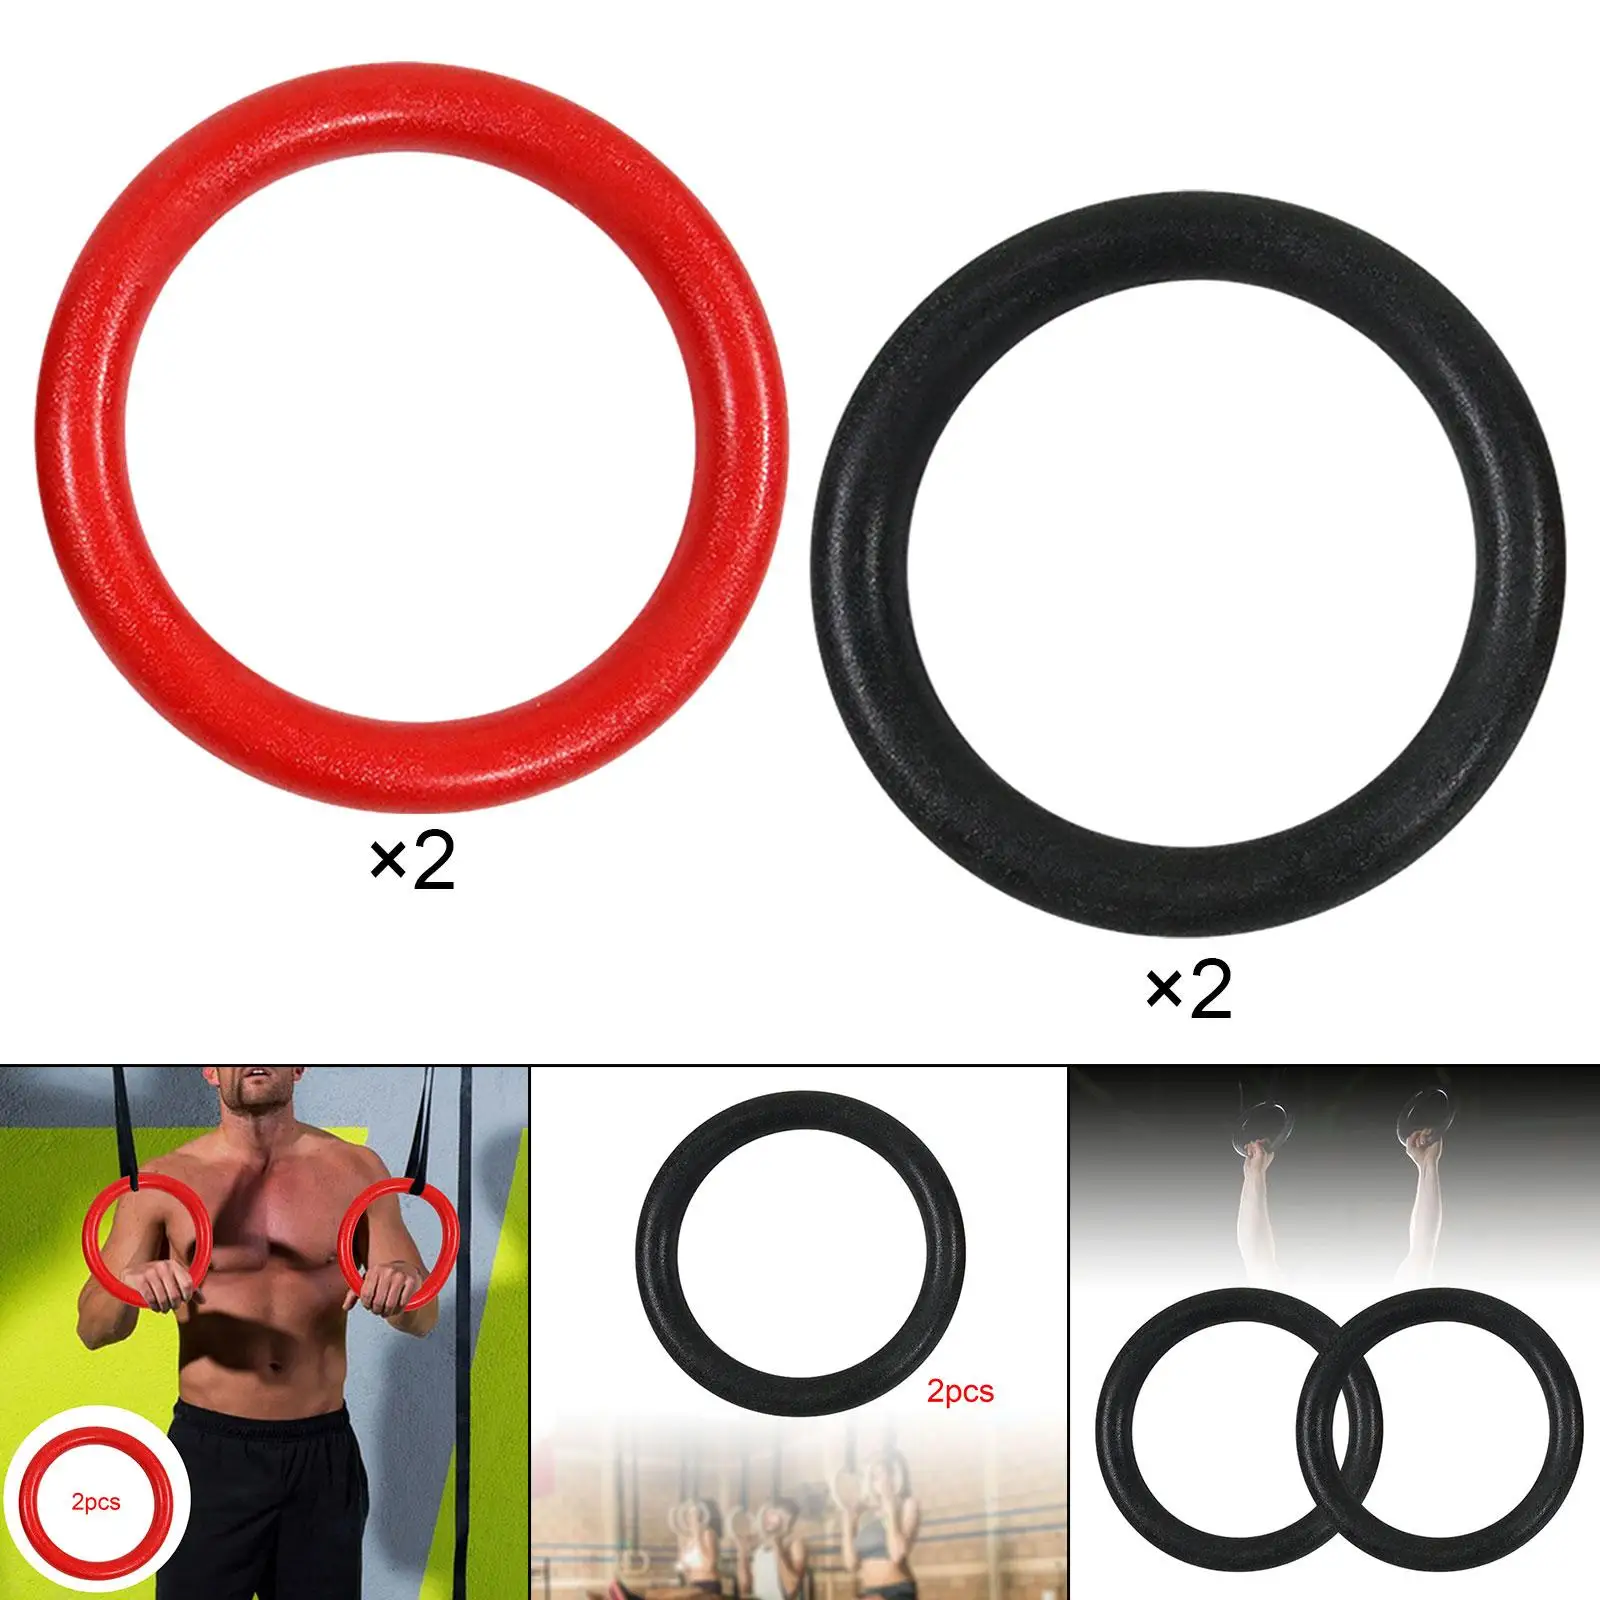 2Pcs Gymnastic Rings Anti Slip Rings for Children Adults Gym Rings for Fitness Equipment Core Workout Home Gym Stretching